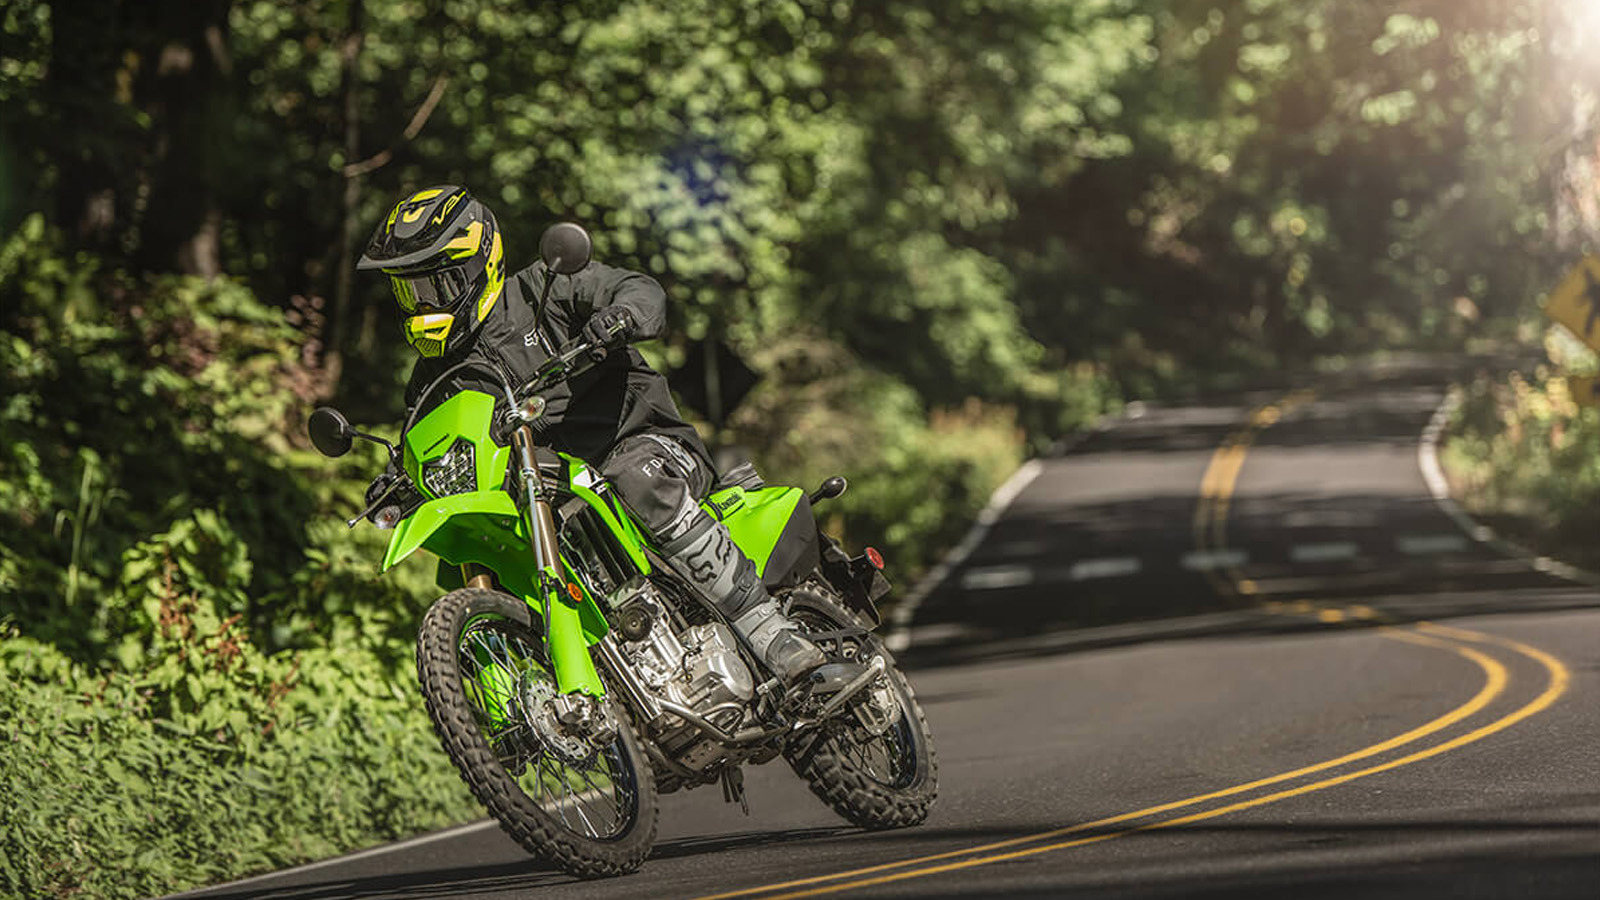 5 Of The Best Dual Sport Motorcycles For Beginners – SlashGear